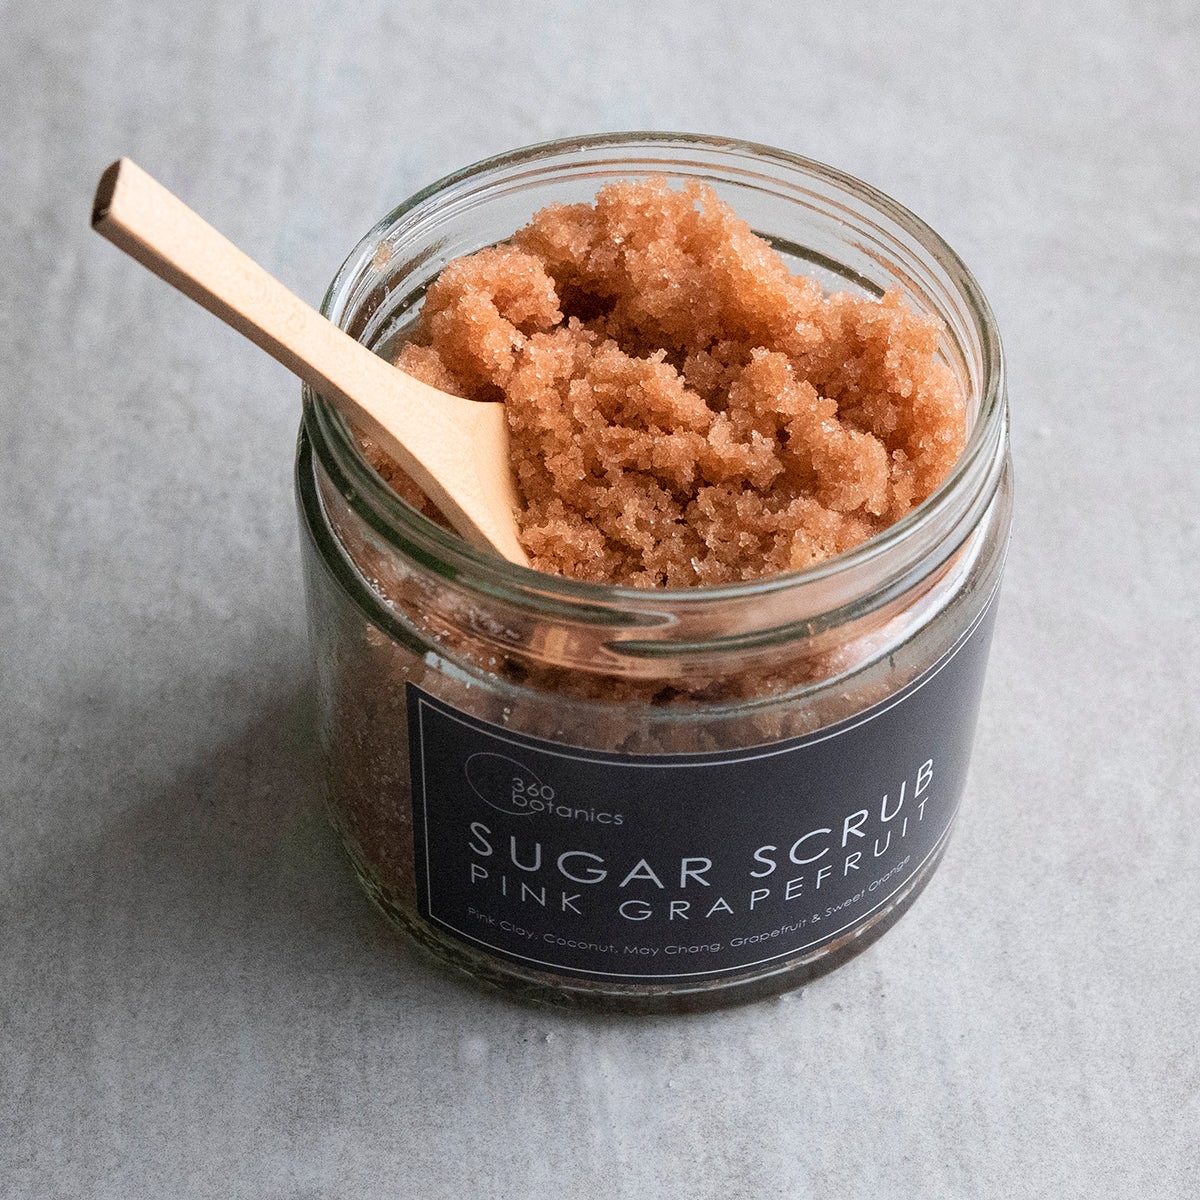 An open jar of 360 Botanics Sugar Scrub with Pink Grapefruit, revealing a rich texture of brown sugar crystals. A wooden spoon rests on top, partially covered by the scrub, set against a grey background, highlighting the product's natural exfoliating qualities